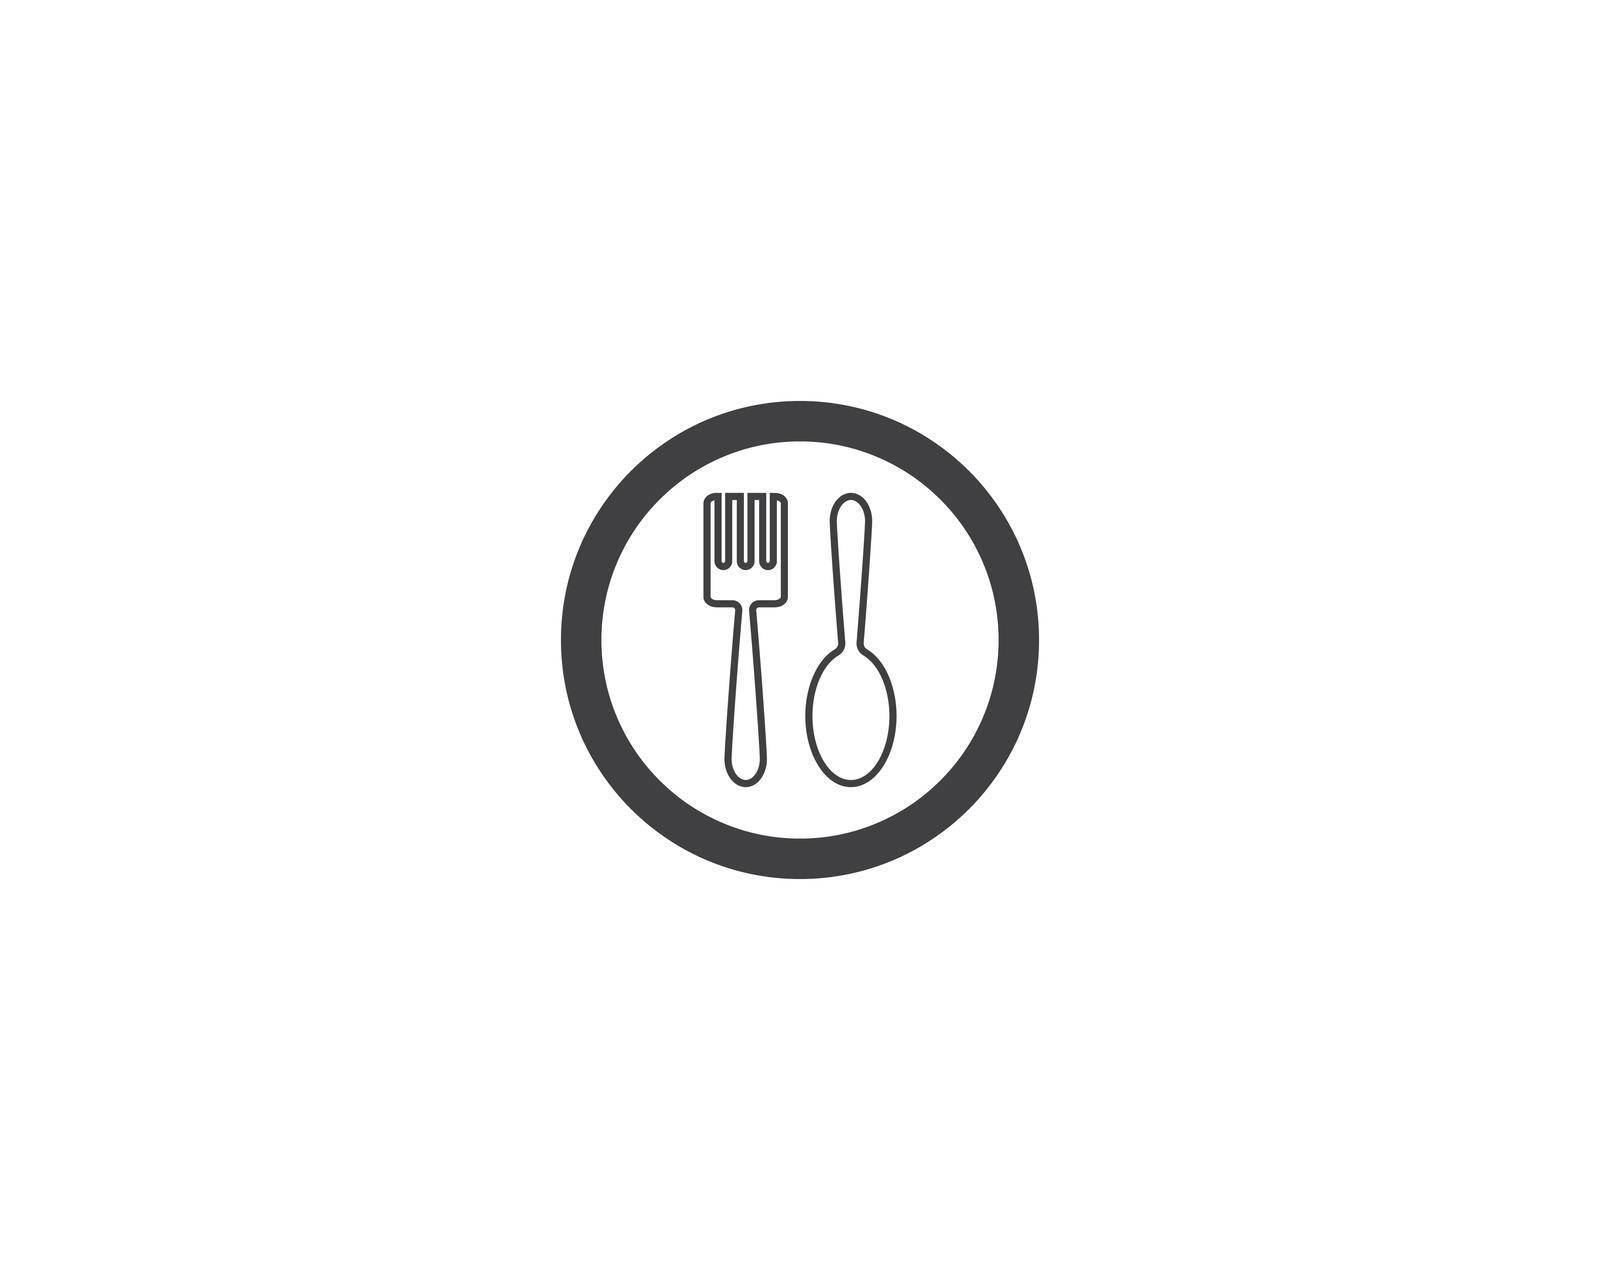 Spoon and fork icon by Fat17